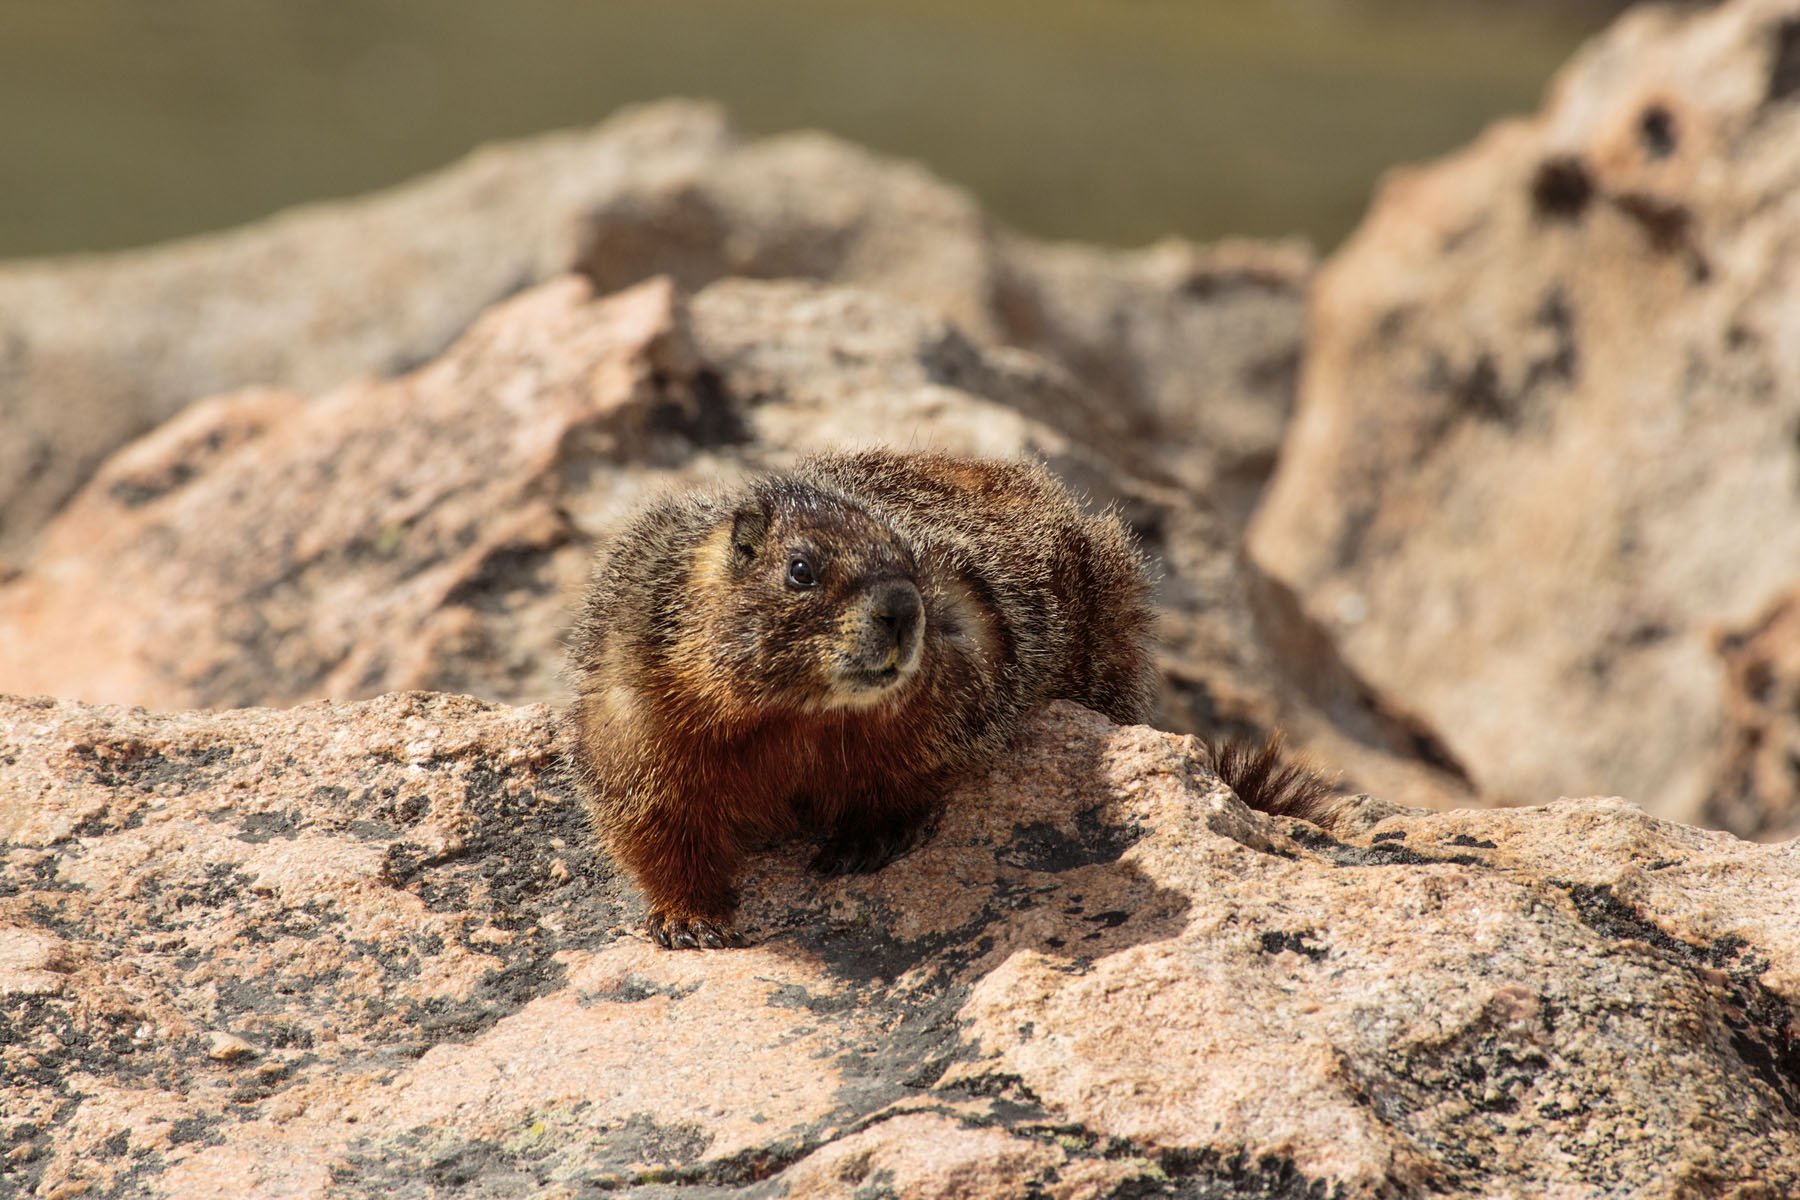 Marmot, Beartooth Highway, Wyoming.  Click for next photo.